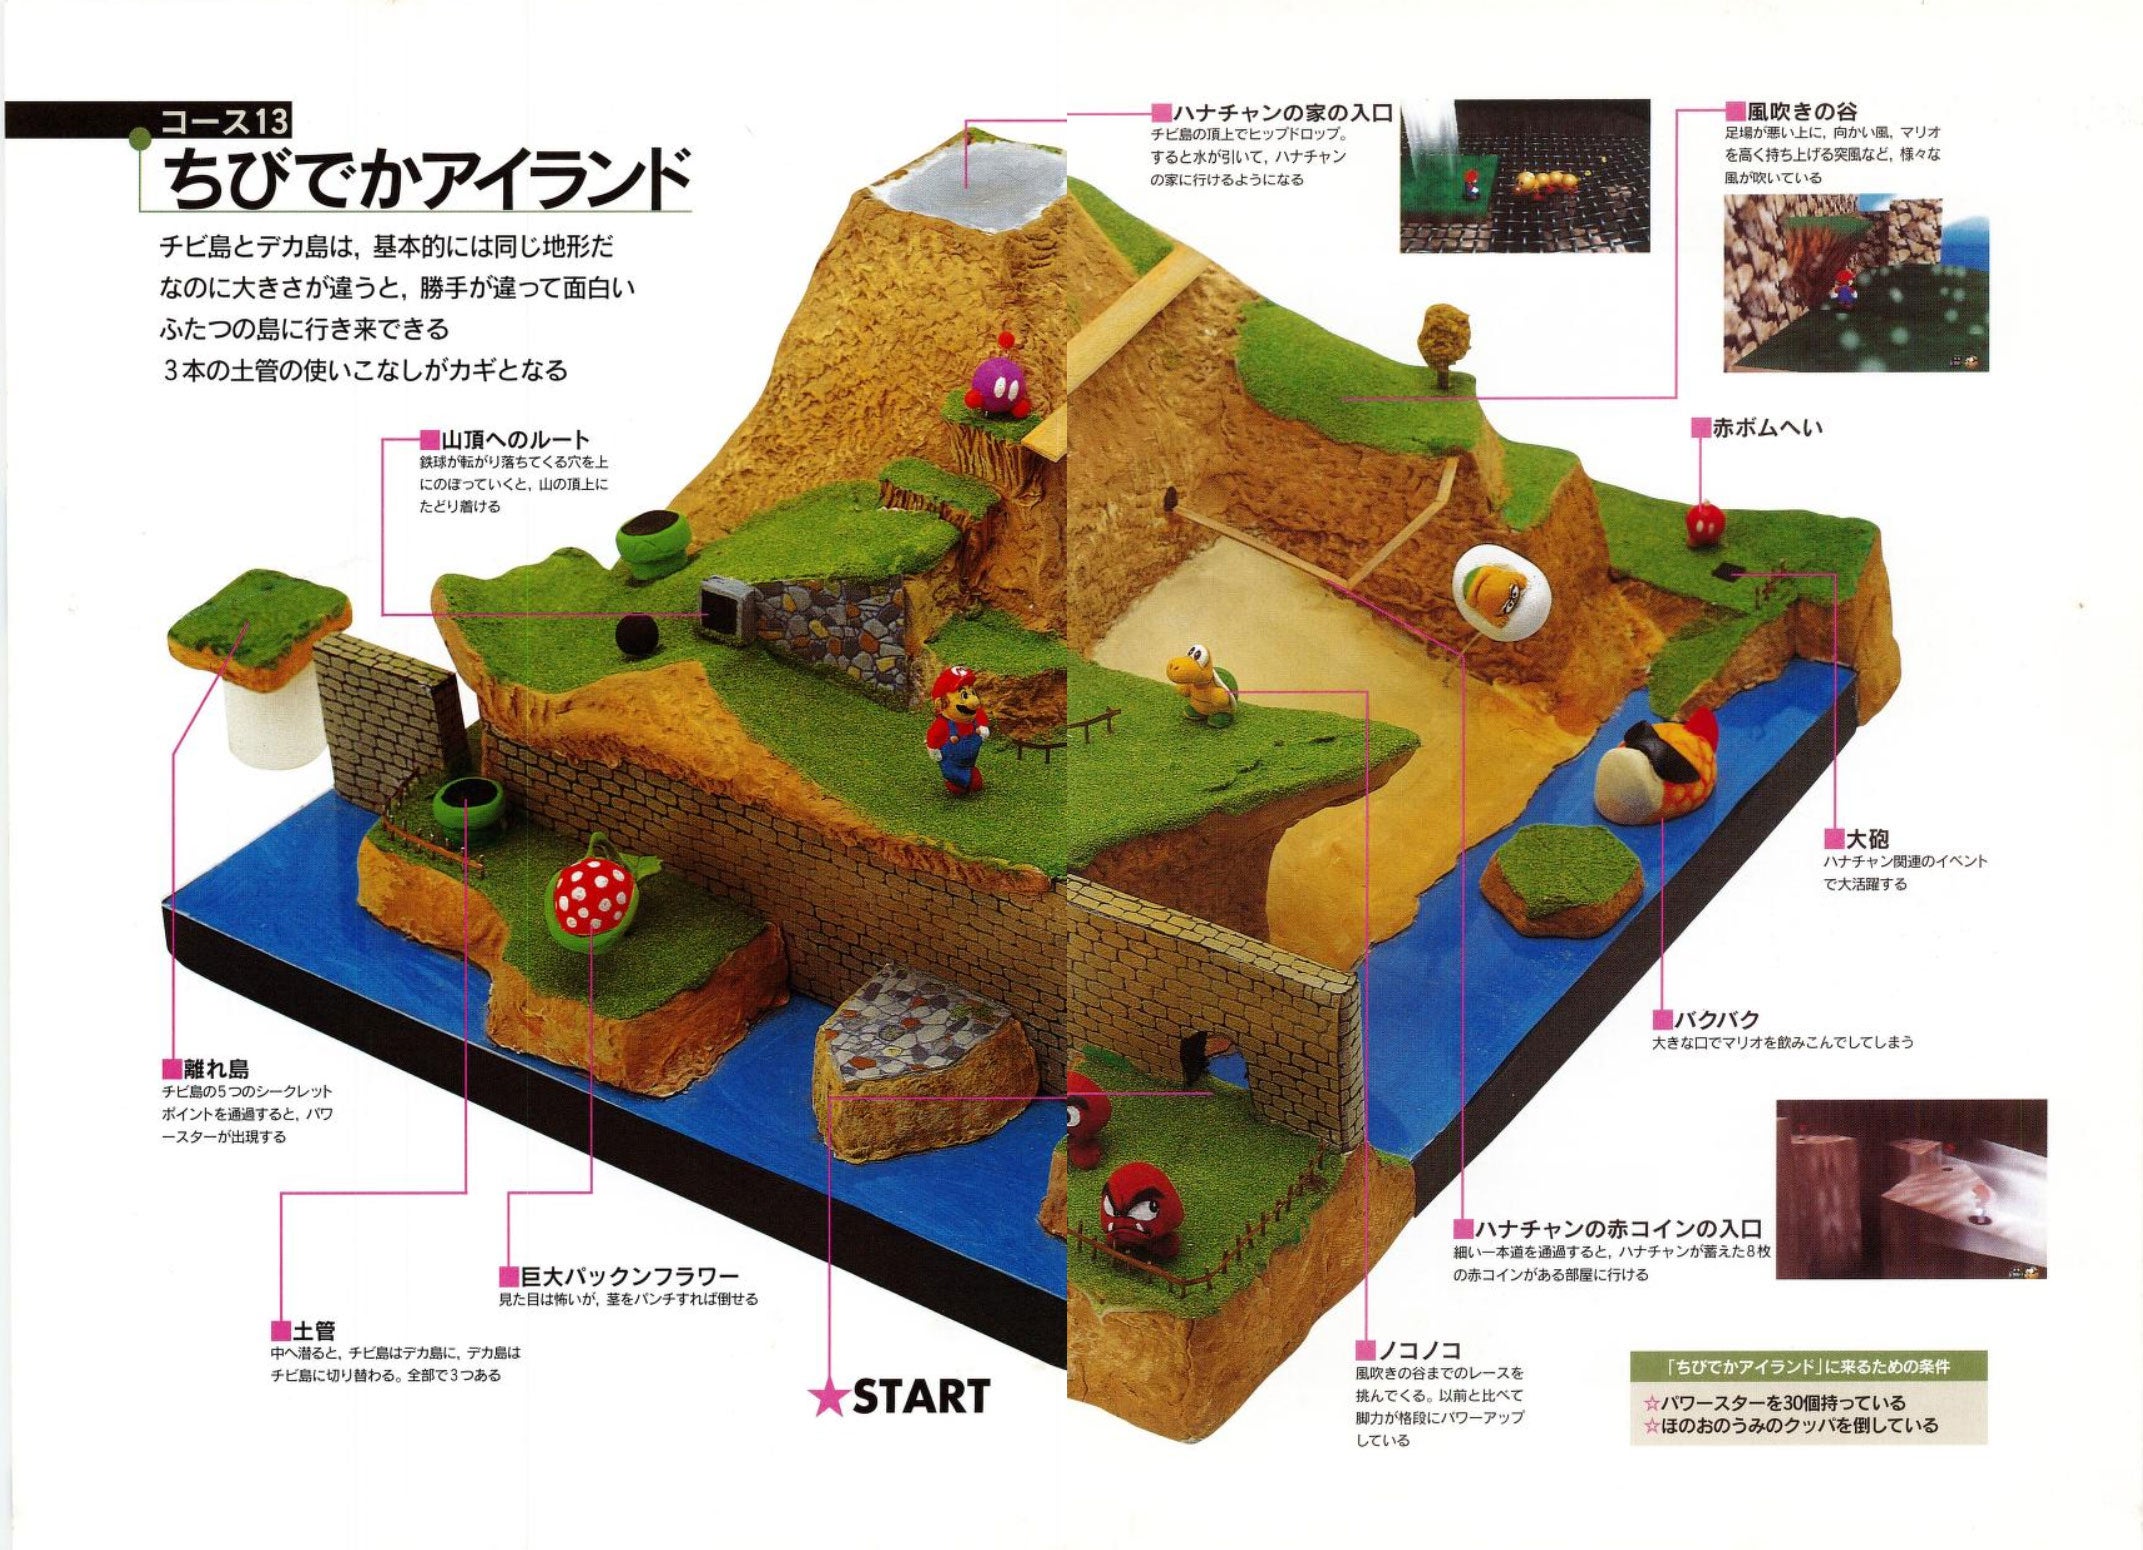 Incredible 90s Super Mario 64 Guide Scanned In HD, Can Now Be Enjoyed By All